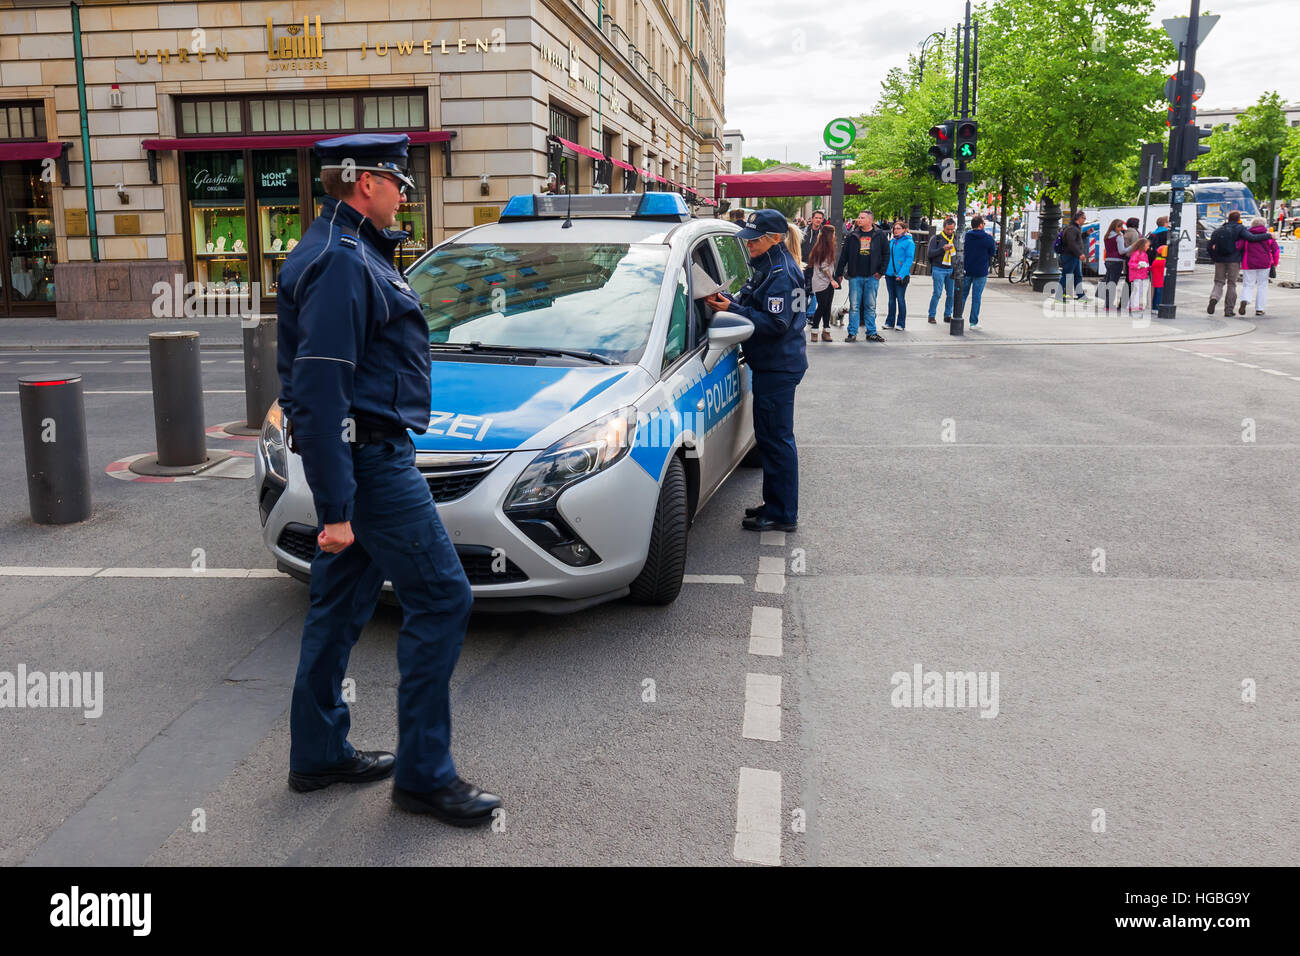 Berlin, Germany - May 14, 2016: police car in Berlin with unidentified people. Berlin, capital of Germany, has about 3.5 mio inhabitants and is a glob Stock Photo